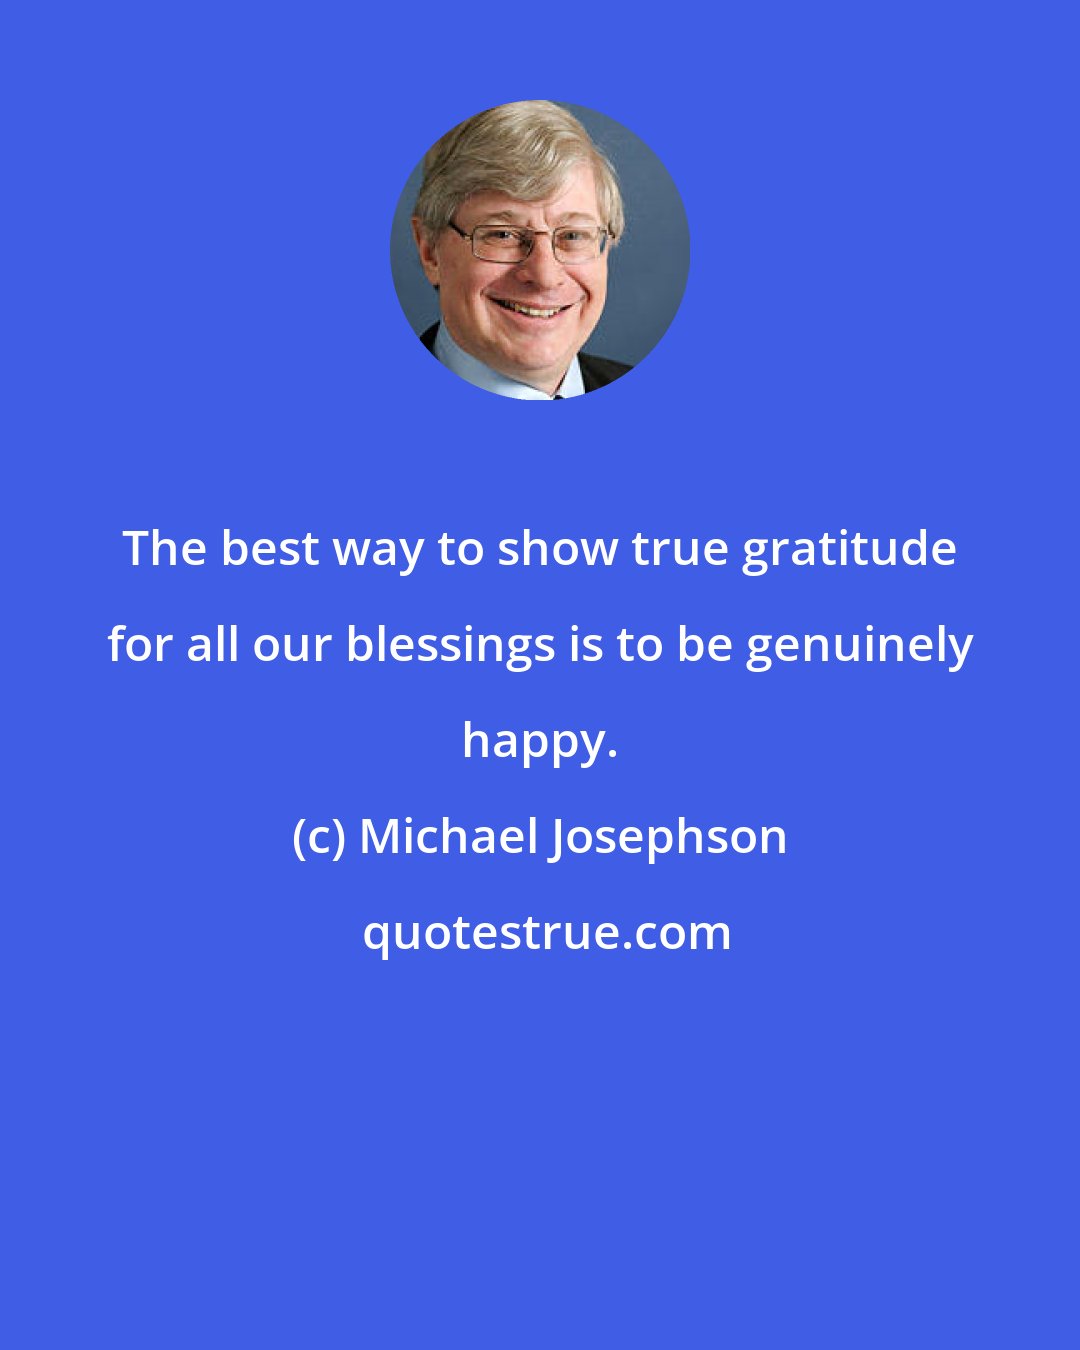 Michael Josephson: The best way to show true gratitude for all our blessings is to be genuinely happy.